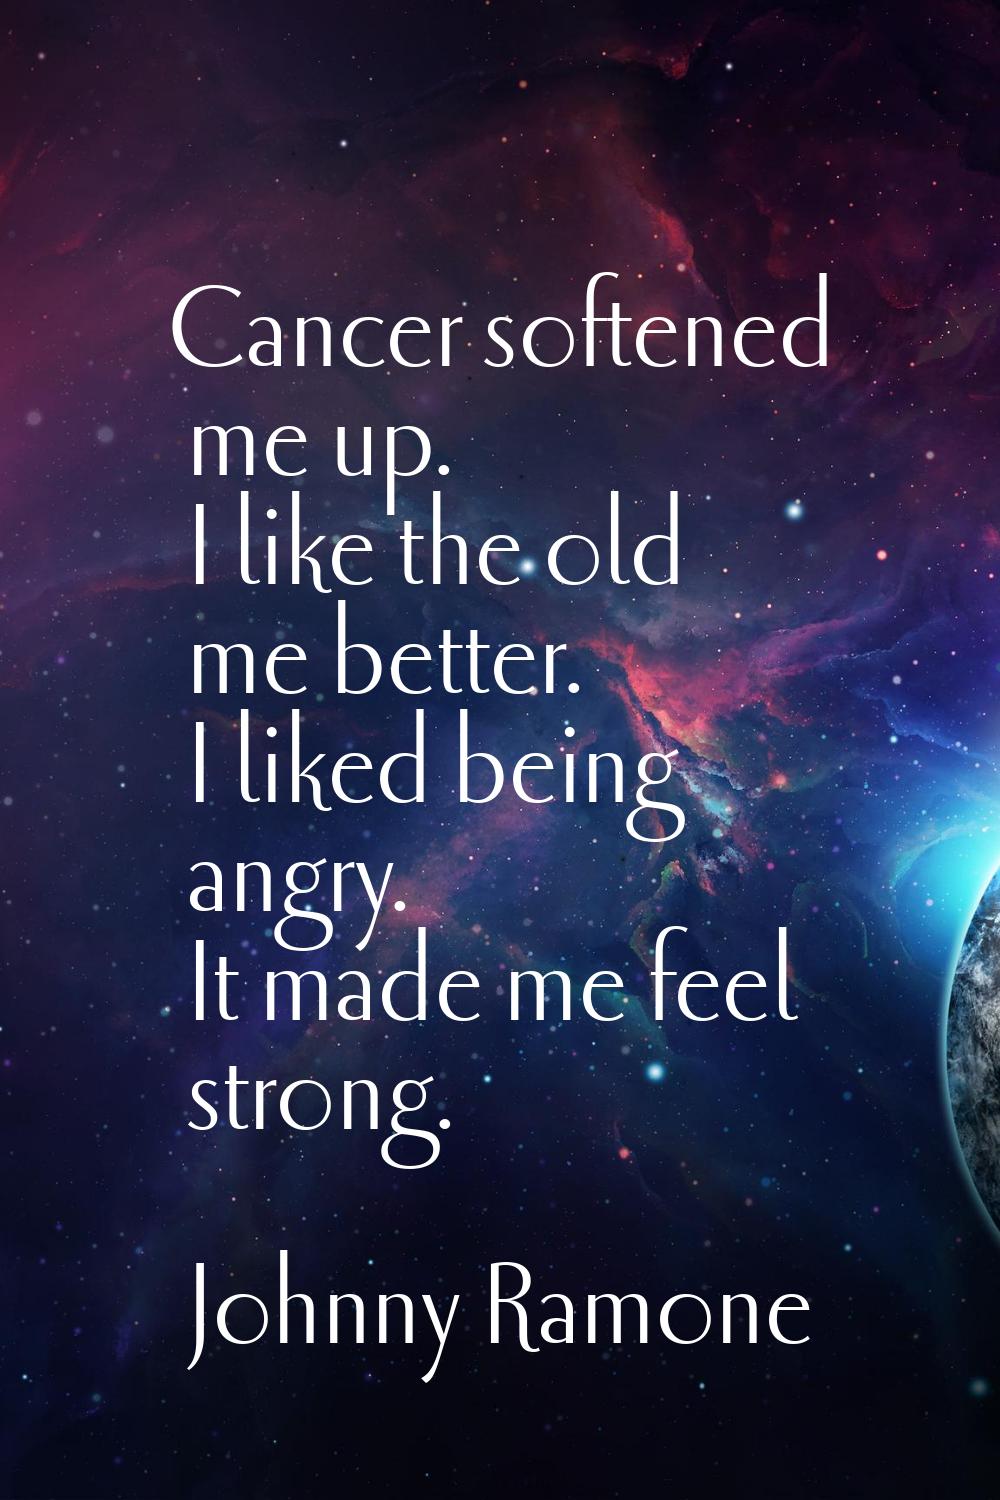 Cancer softened me up. I like the old me better. I liked being angry. It made me feel strong.